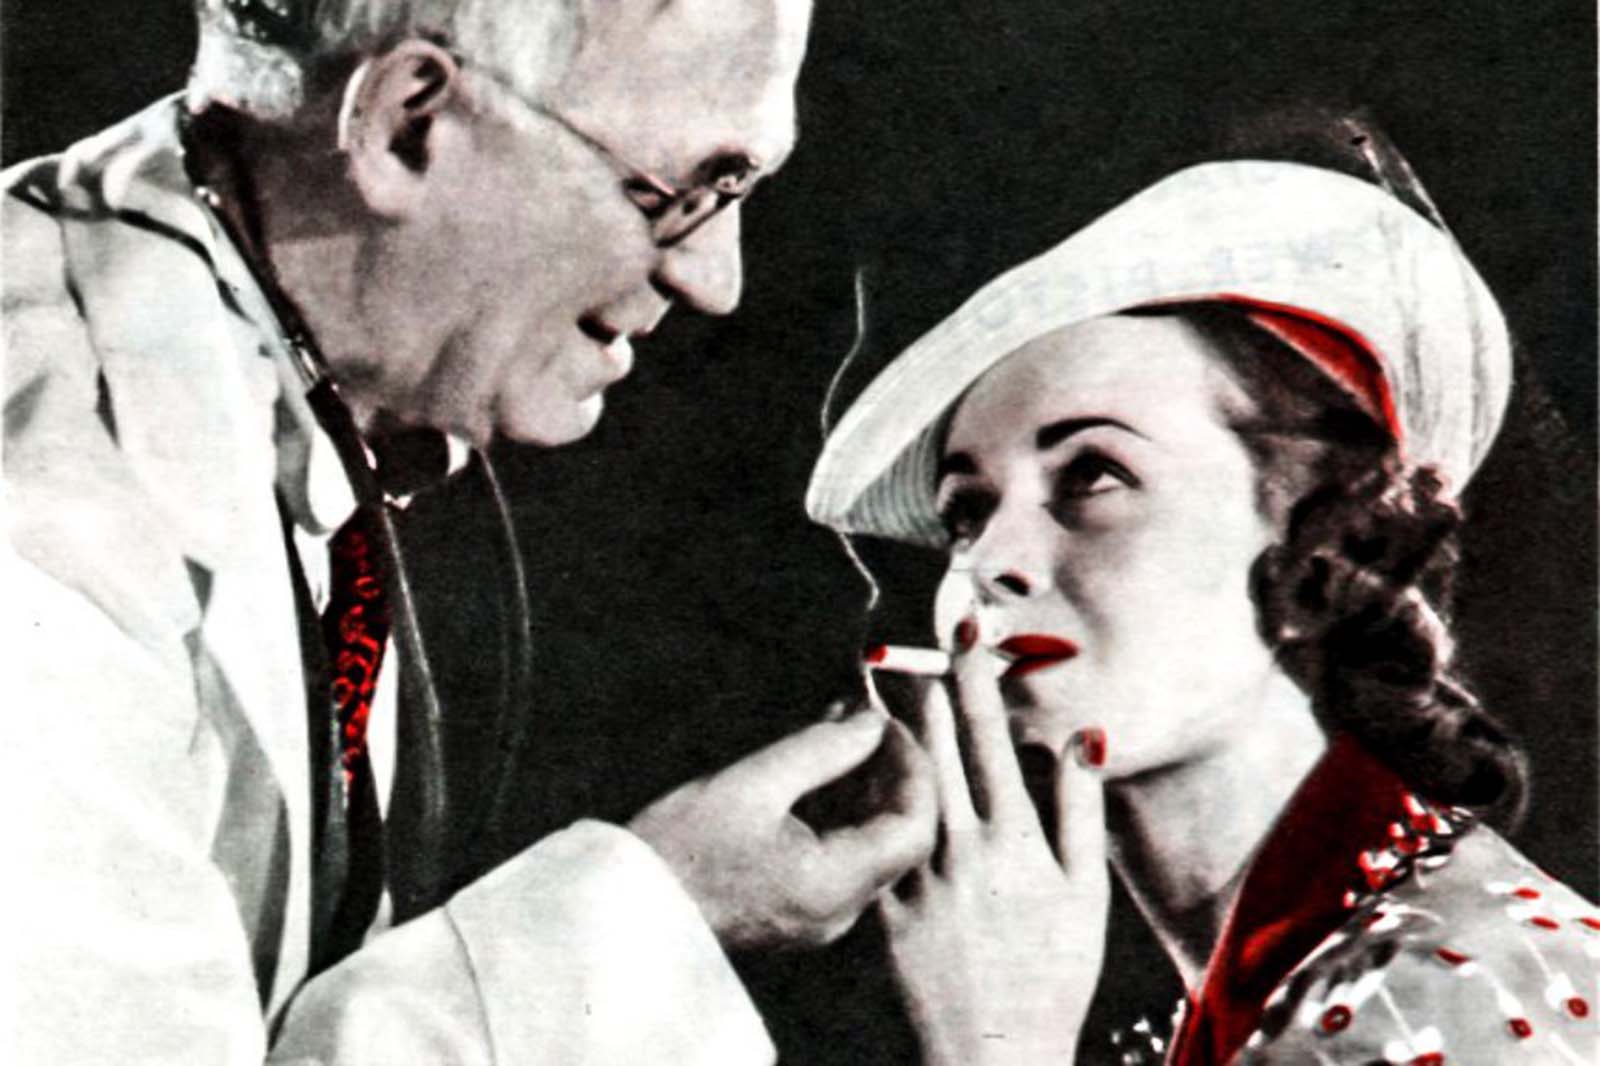 Decades before the full-fledged public health campaign against smoking, tobacco companies tried to align their brands with doctors using bribery and ludicrous health claims.